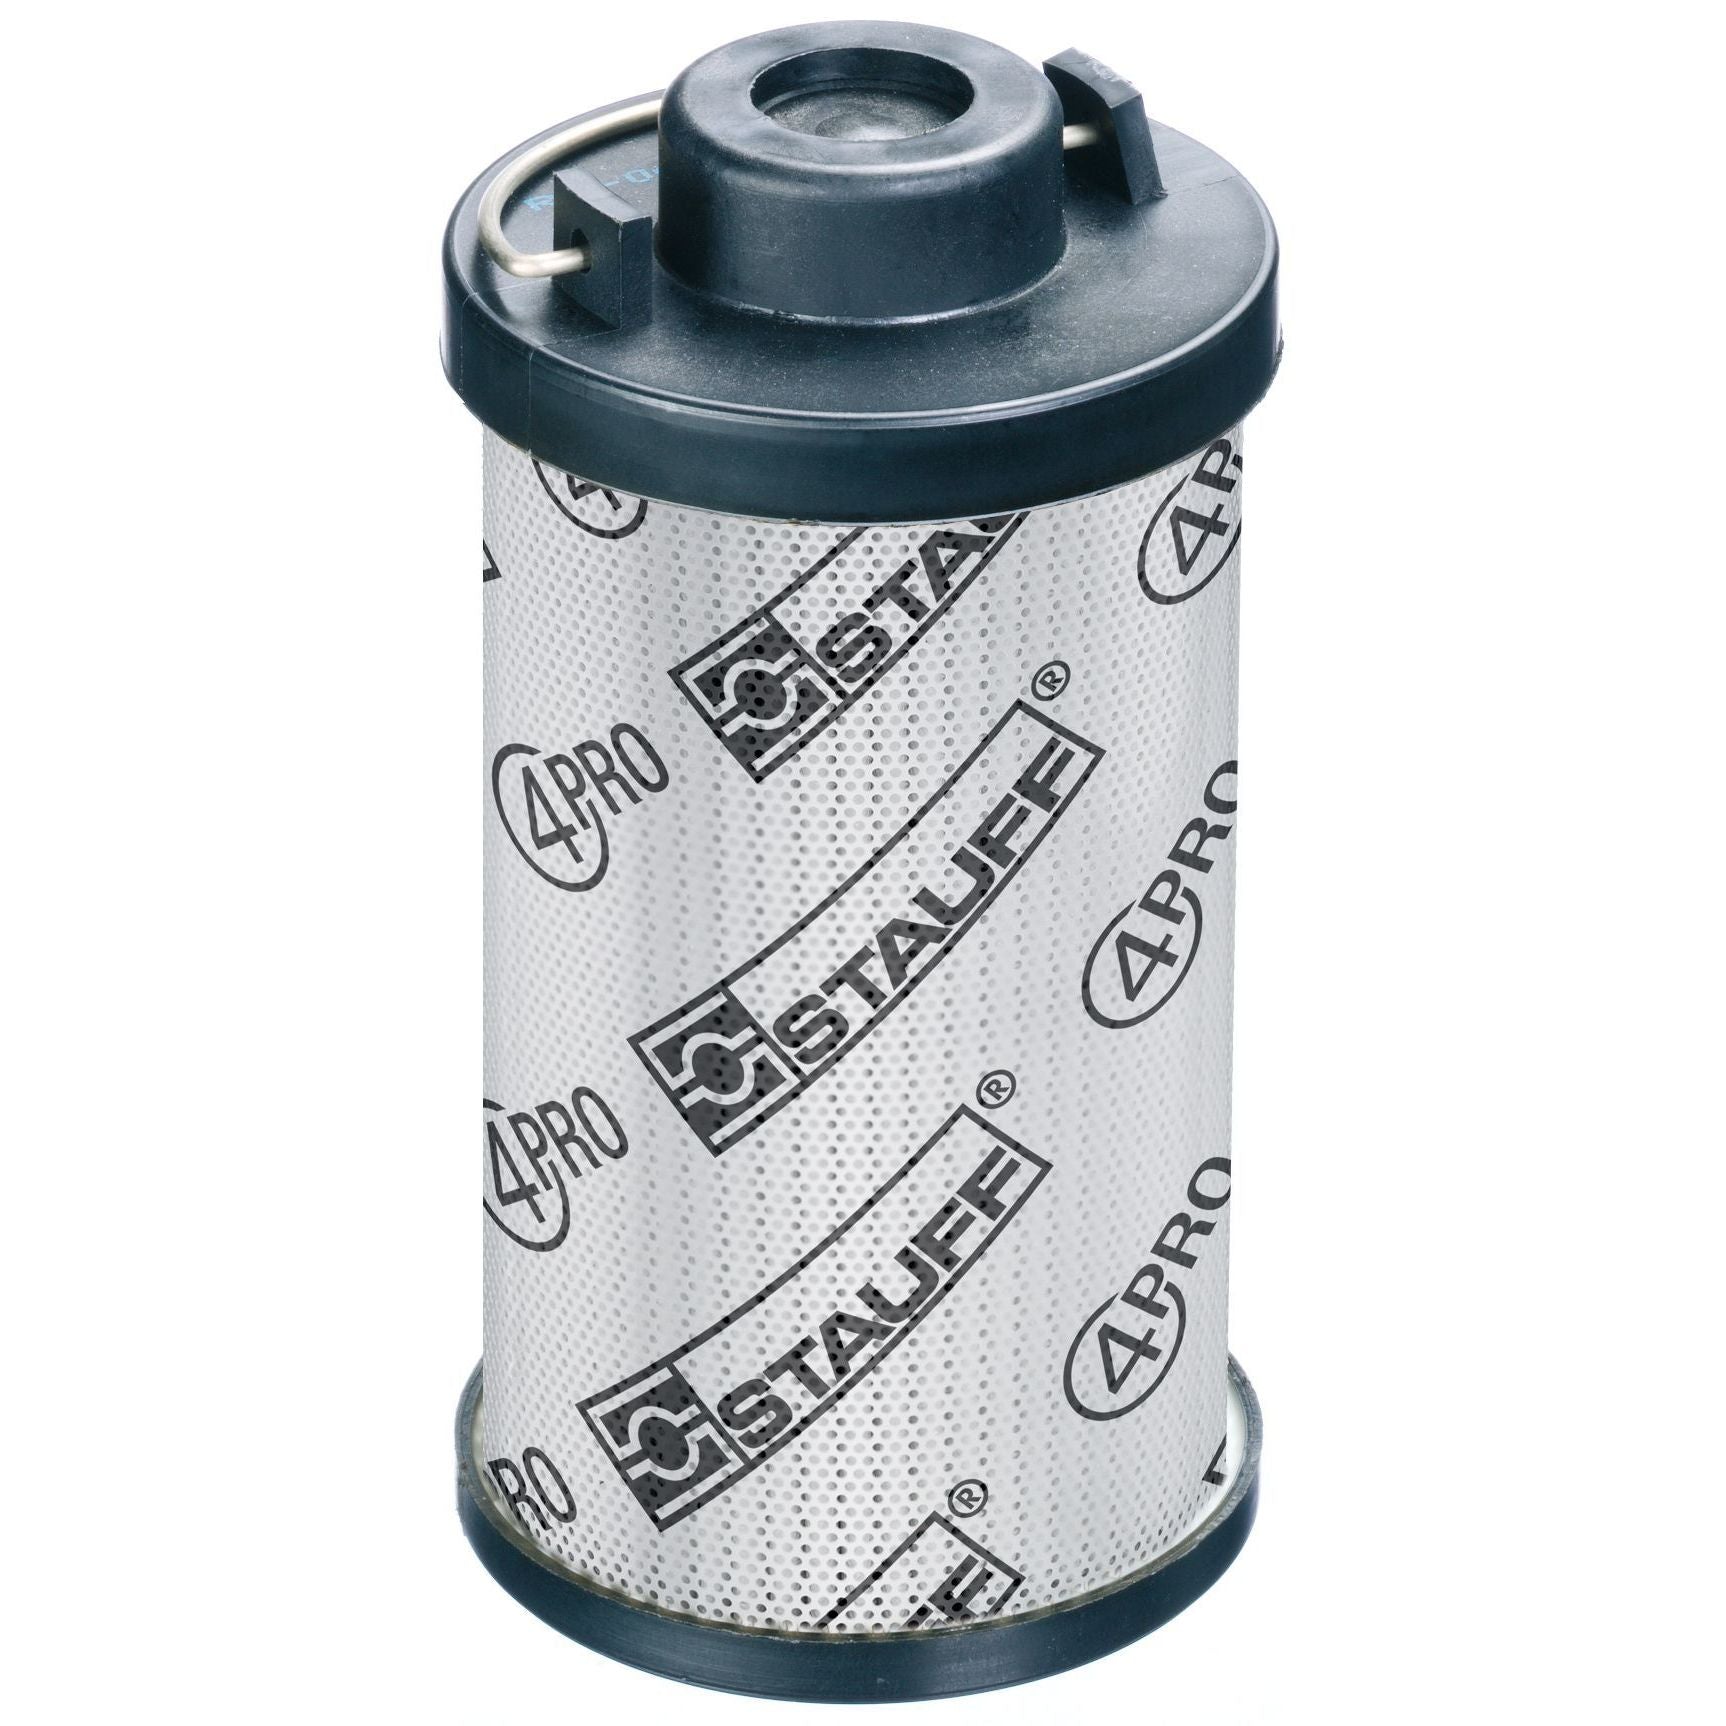 RE-045-G-10-B-B3/4 : Stauff RF-045 Series Filter Element, 10 Micron, Synthetic, 363psi Collapse Differential, Buna